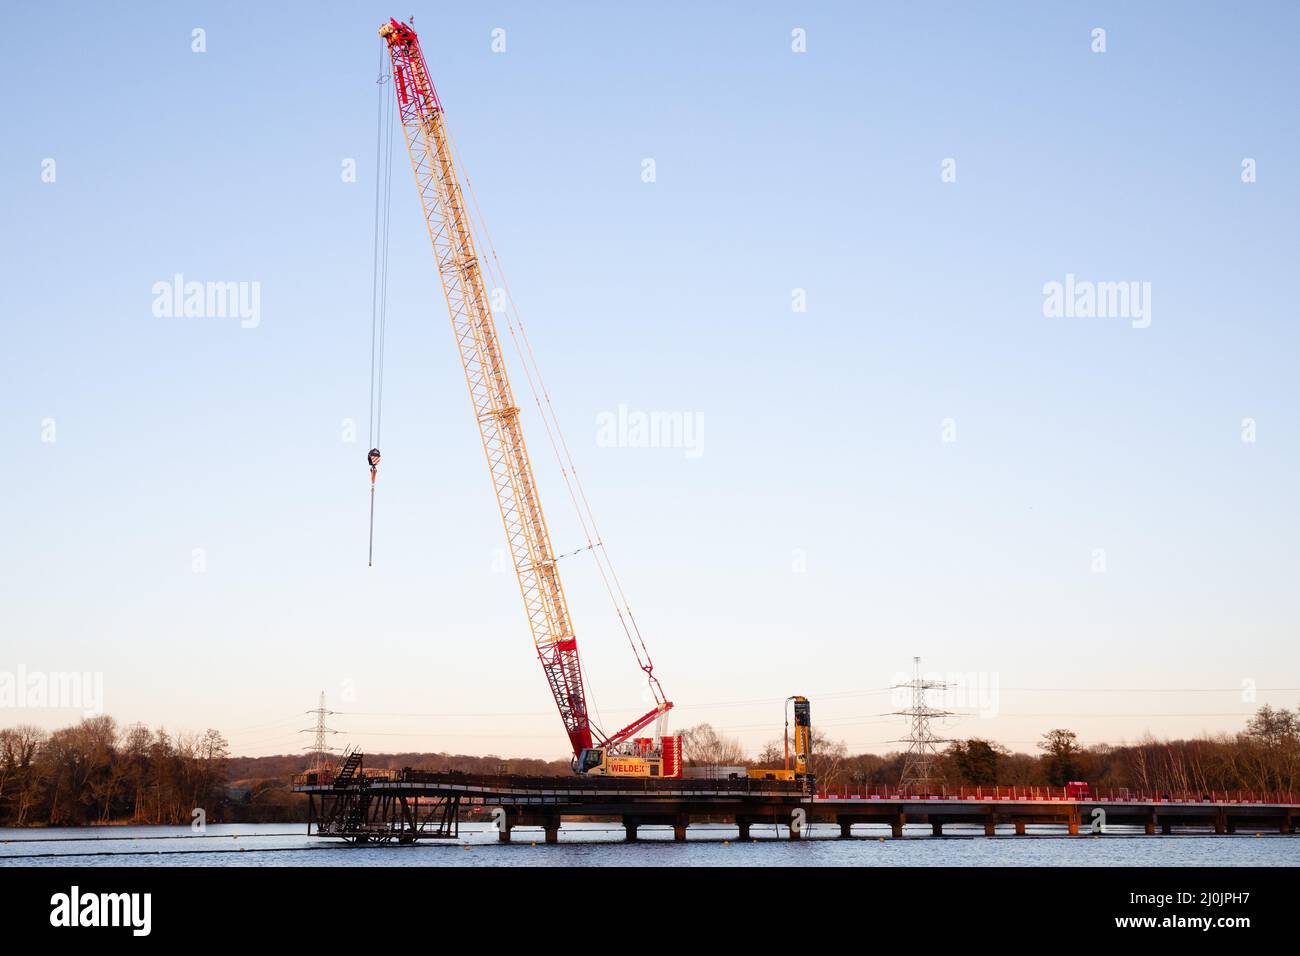 Harefield, UK. 27th February, 2022. Construction works for the HS2 Colne Valley Viaduct, which will become the UK's longest railway bridge, are pictured at HOAC Lake (Harefield Lake No. 2). A viaduct requiring 292 piles is currently being constructed to carry HS2 across lakes and watercourses in the Colne Valley Regional Park. Credit: Mark Kerrison/Alamy Live News Stock Photo